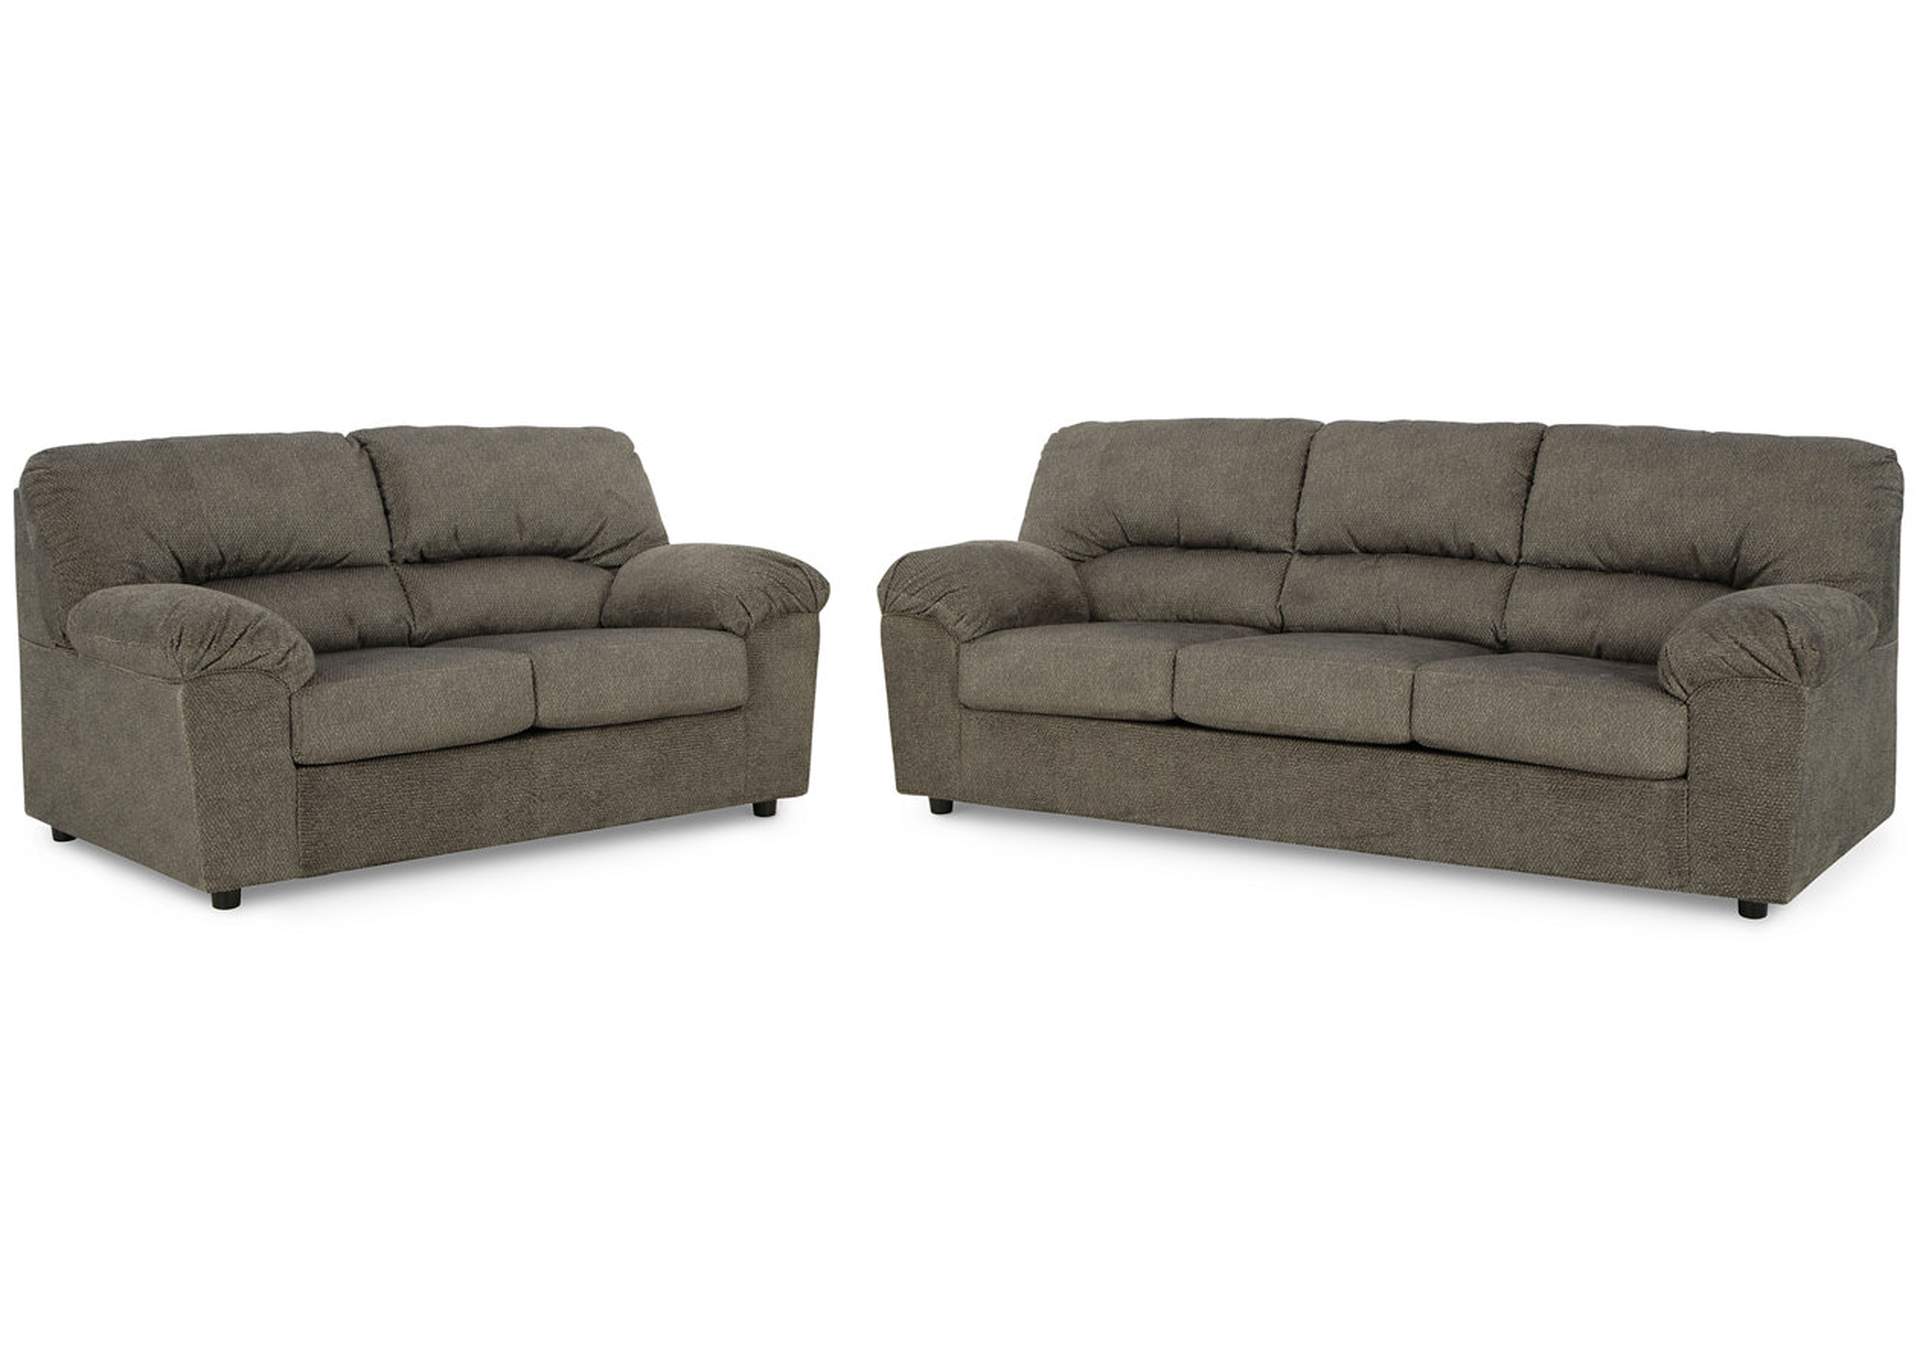 Norlou Sofa and Loveseat,Signature Design By Ashley